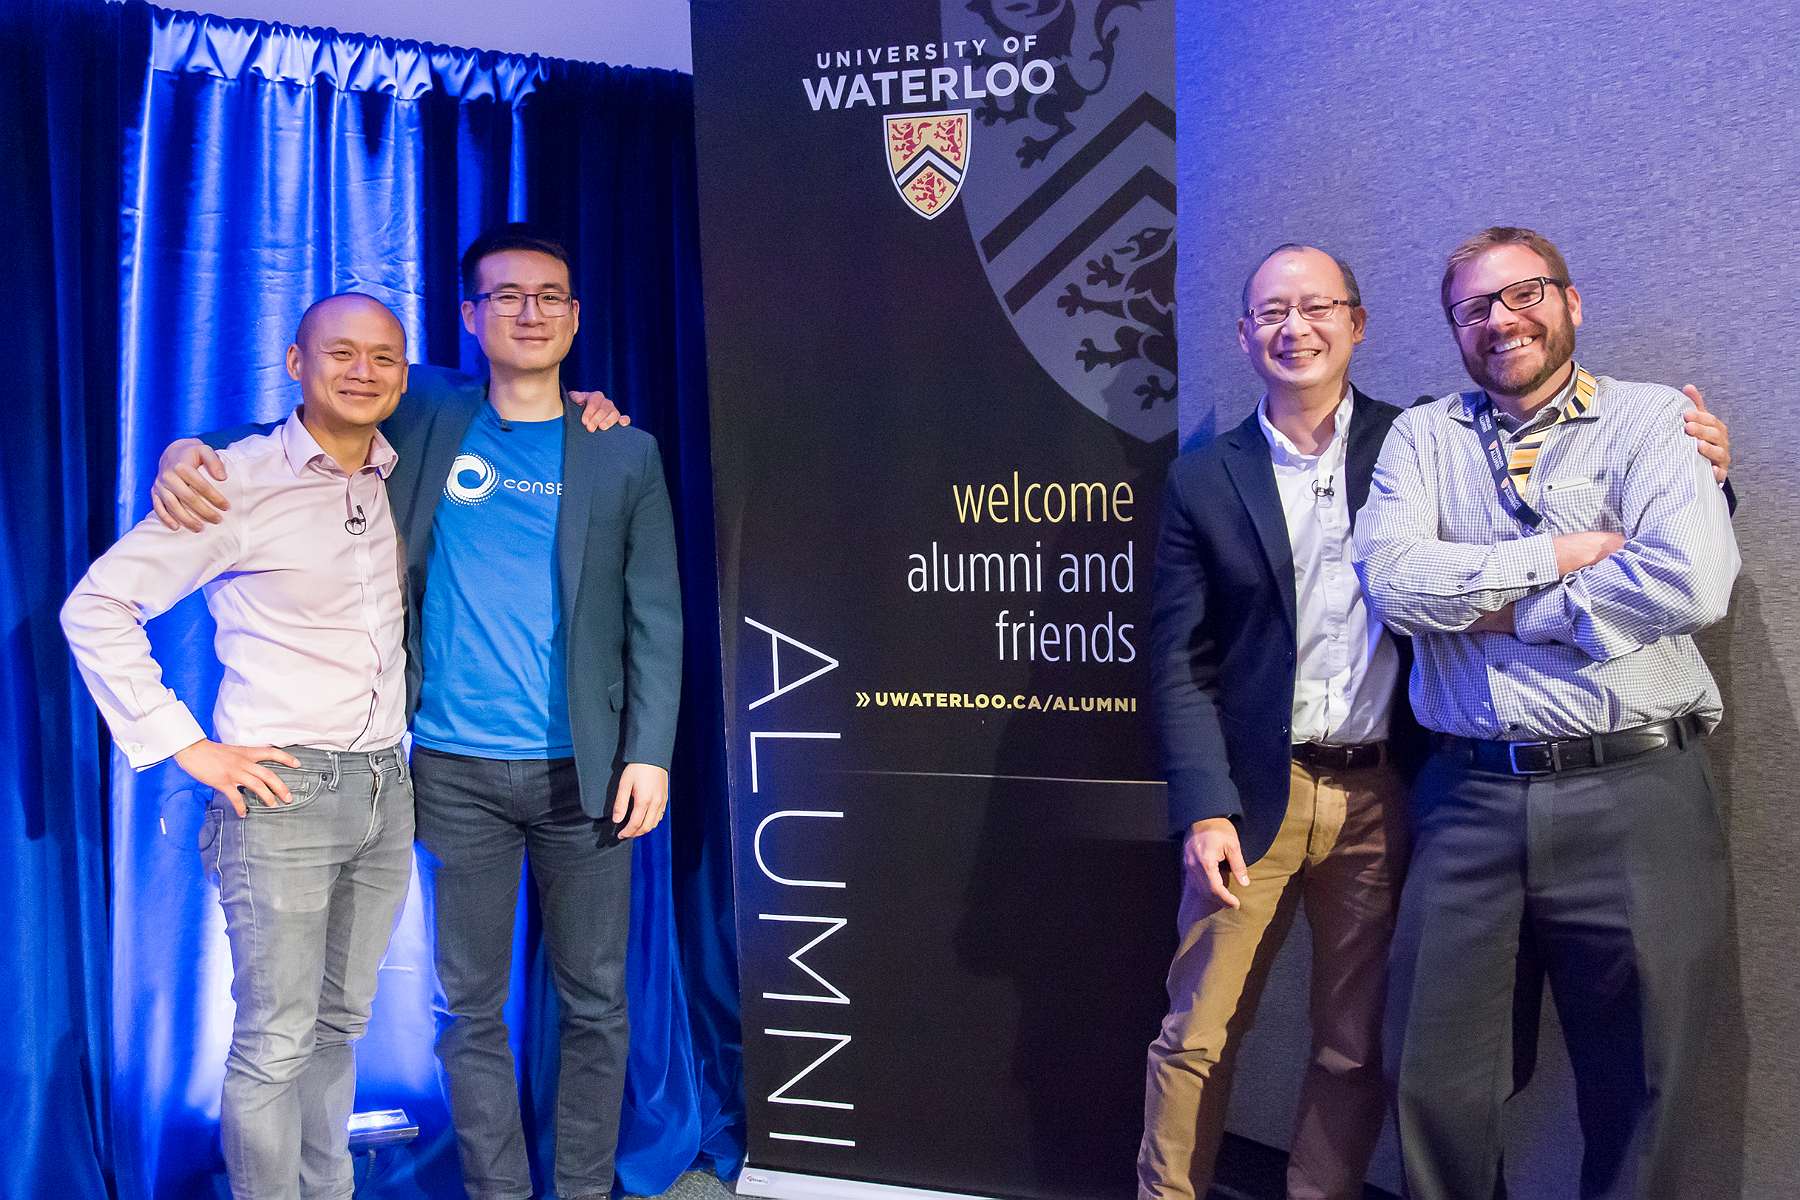 Vincent Lam and audience members pose with the alumni banner